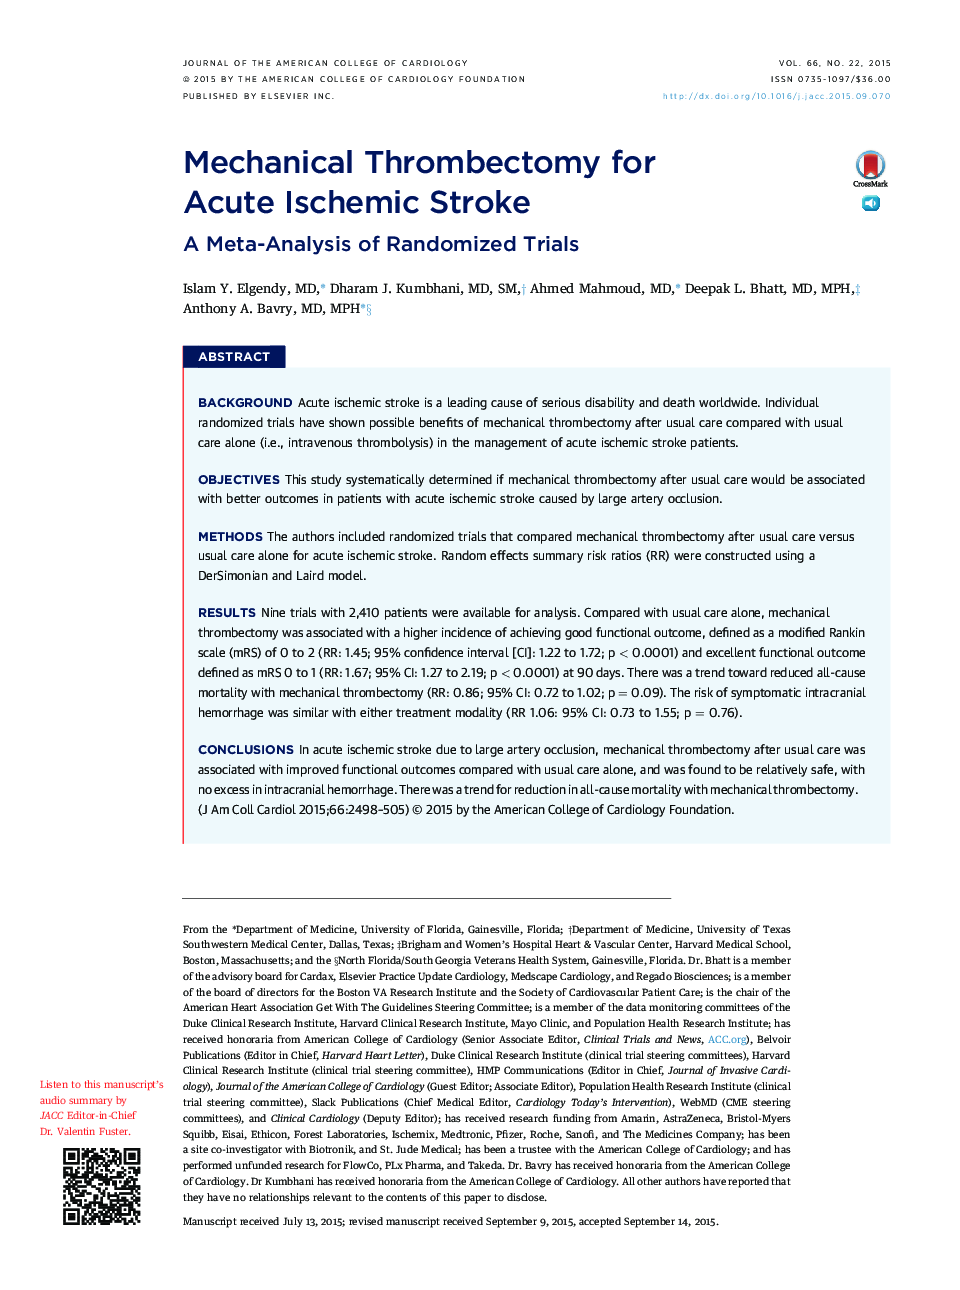 Mechanical Thrombectomy for AcuteÂ Ischemic Stroke: A Meta-Analysis of Randomized Trials